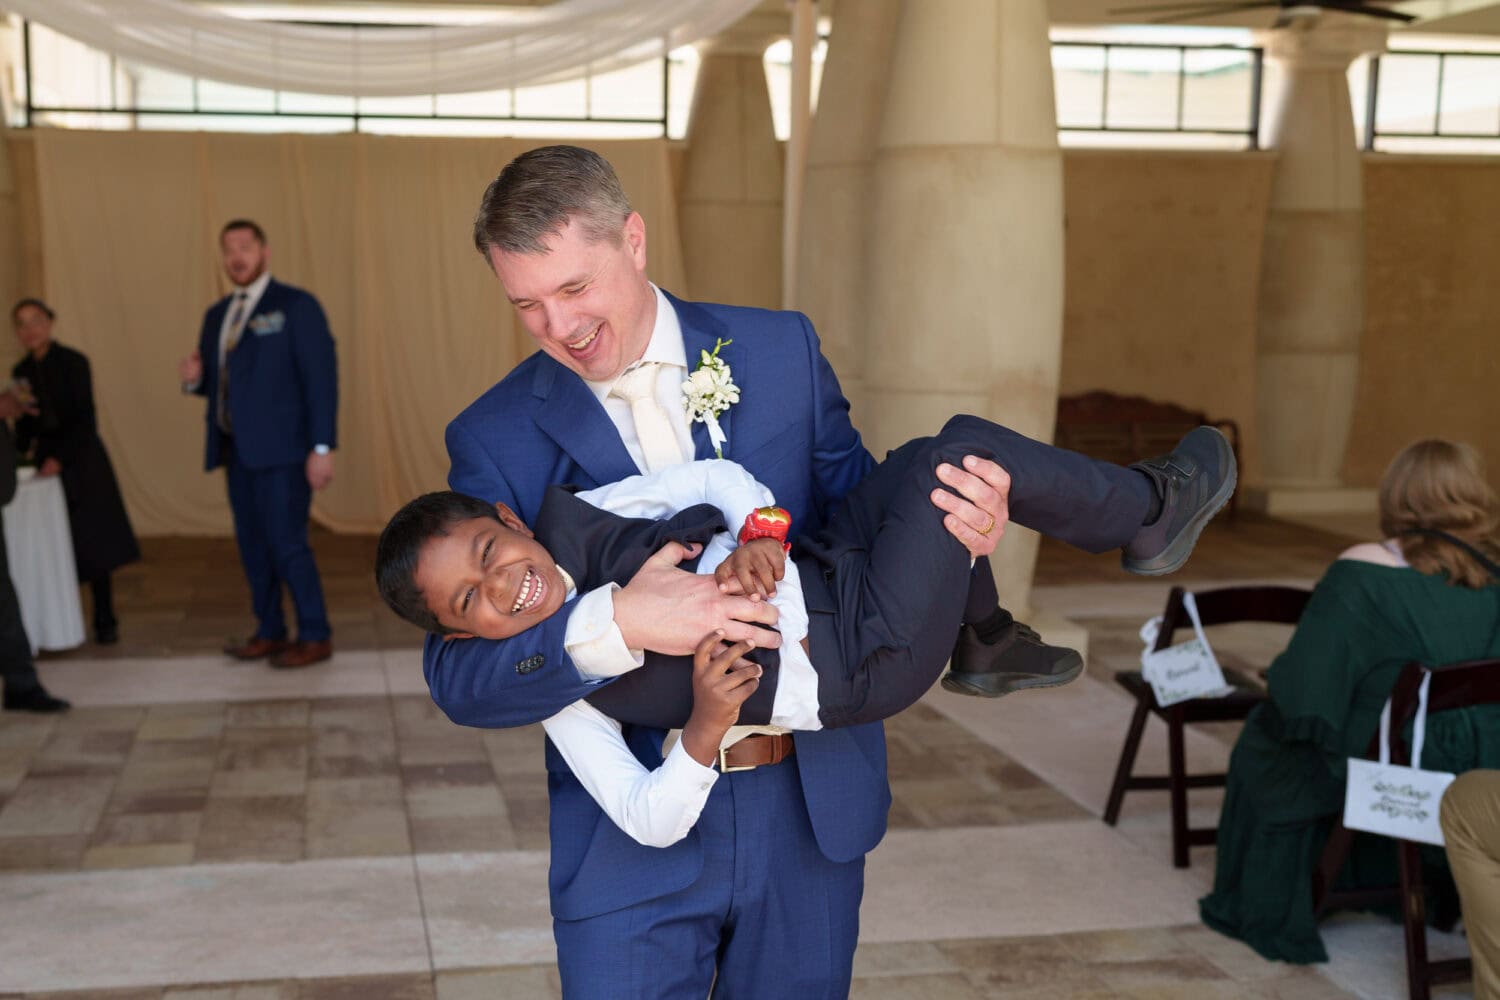 Groom with happy ring bearer - 21 Main Events